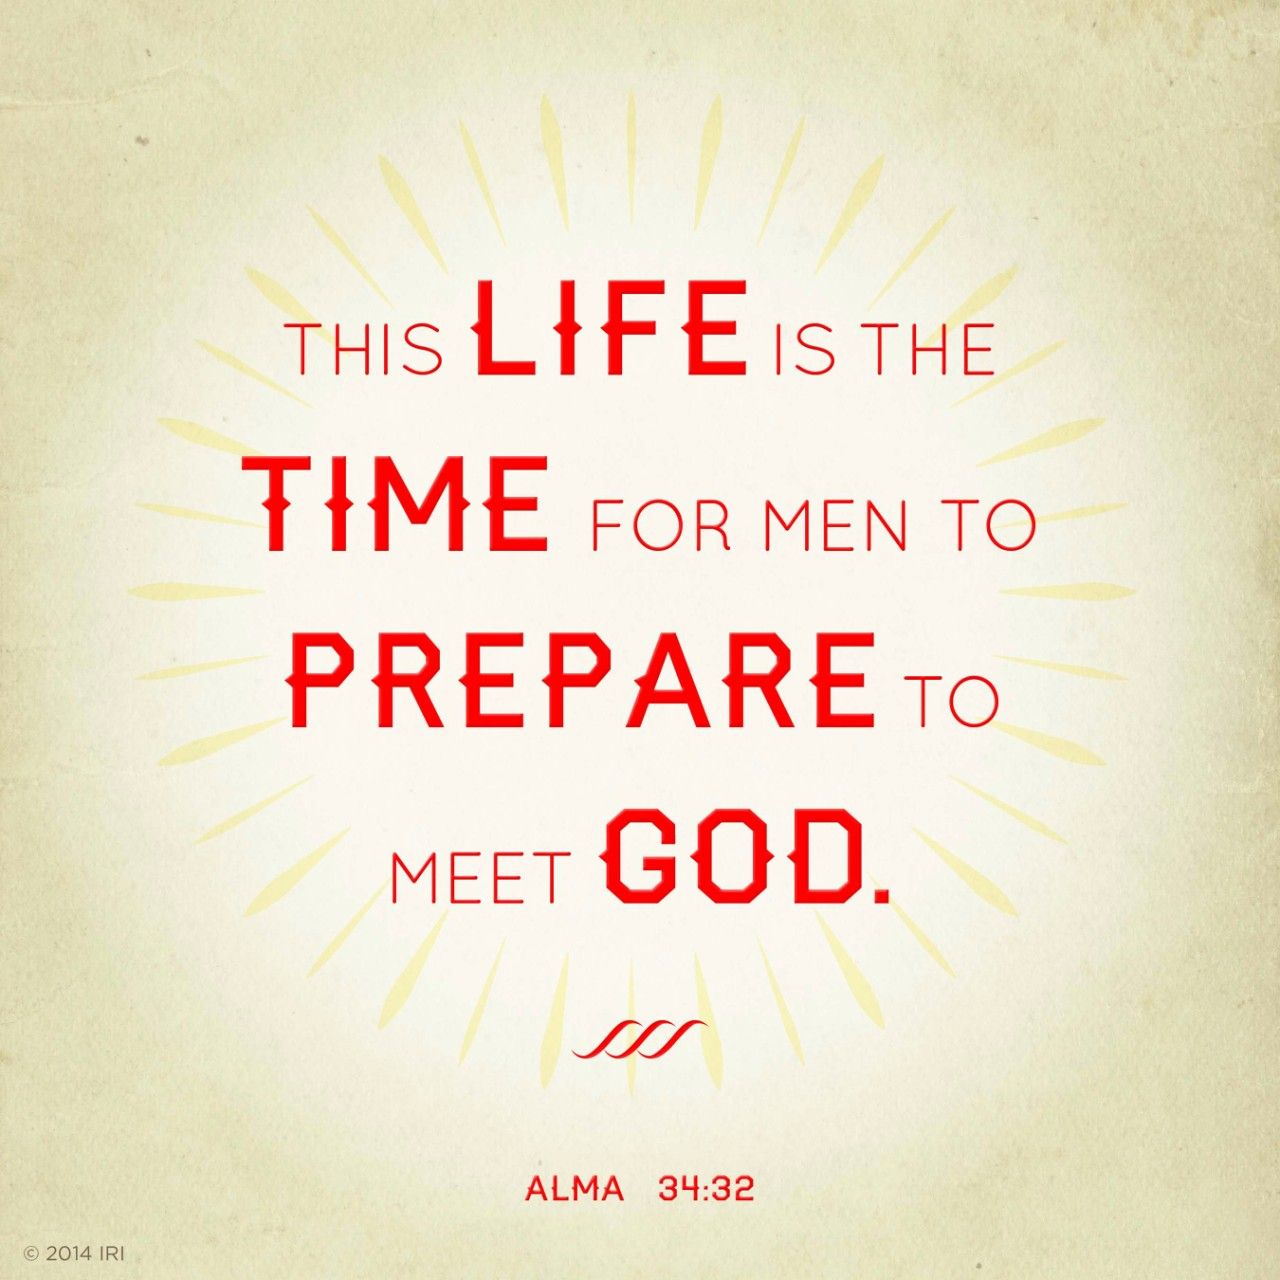 “This life is the time for men to prepare to meet God.”—Alma 34:32